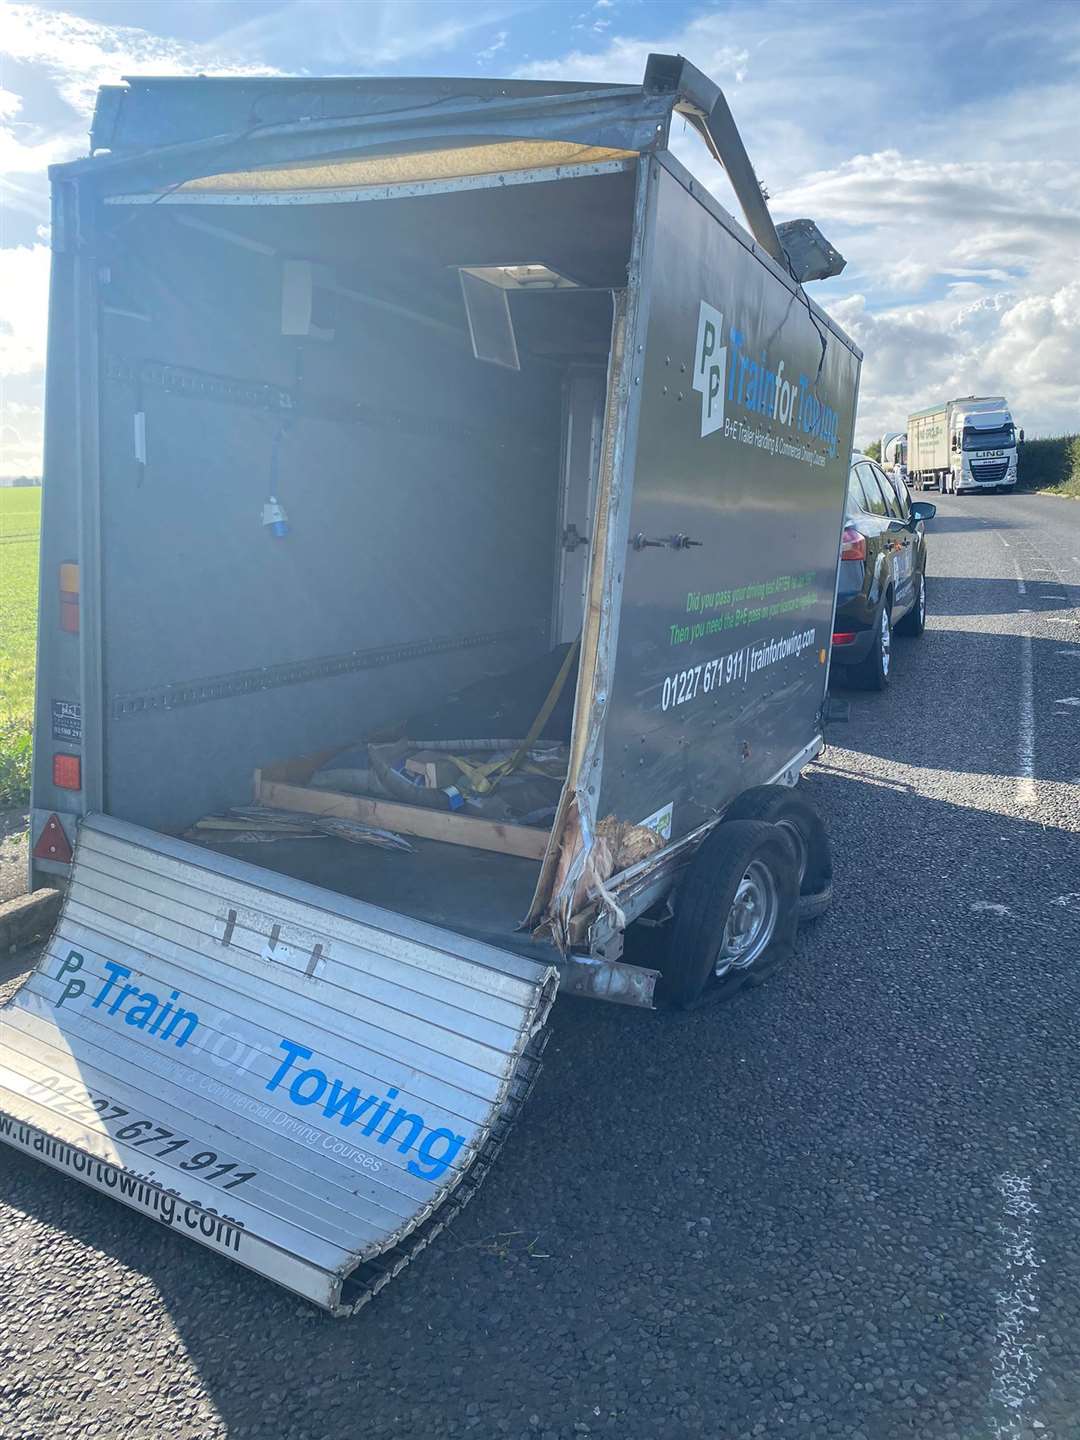 The rear of the trailer which was hit by the van